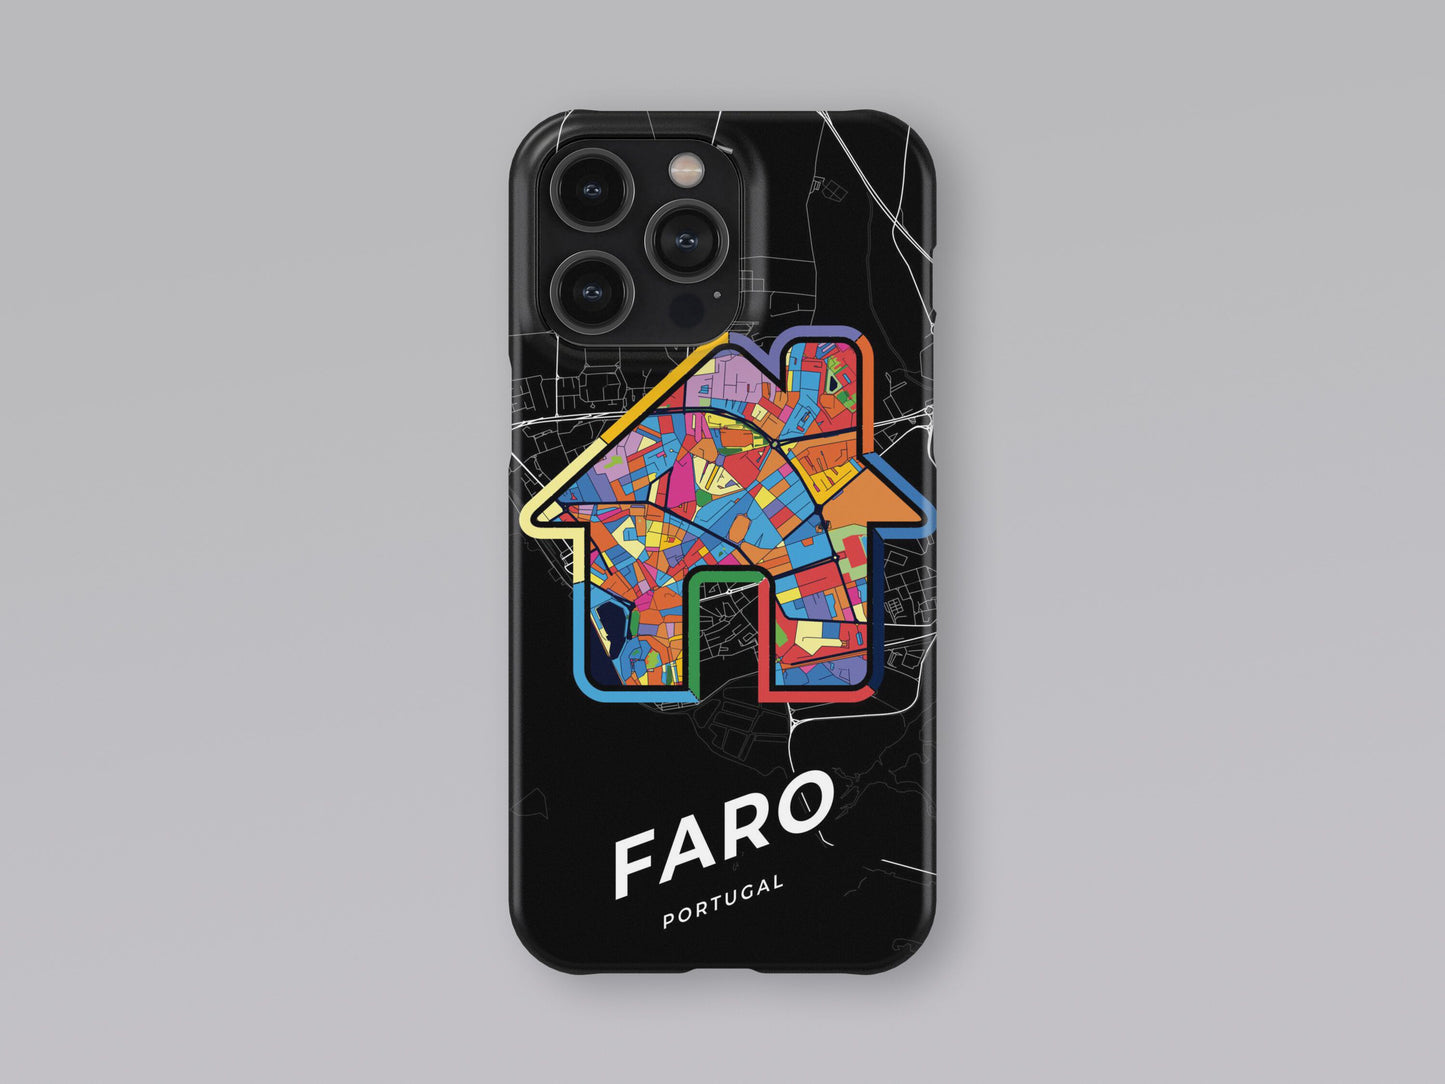 Faro Portugal slim phone case with colorful icon. Birthday, wedding or housewarming gift. Couple match cases. 3